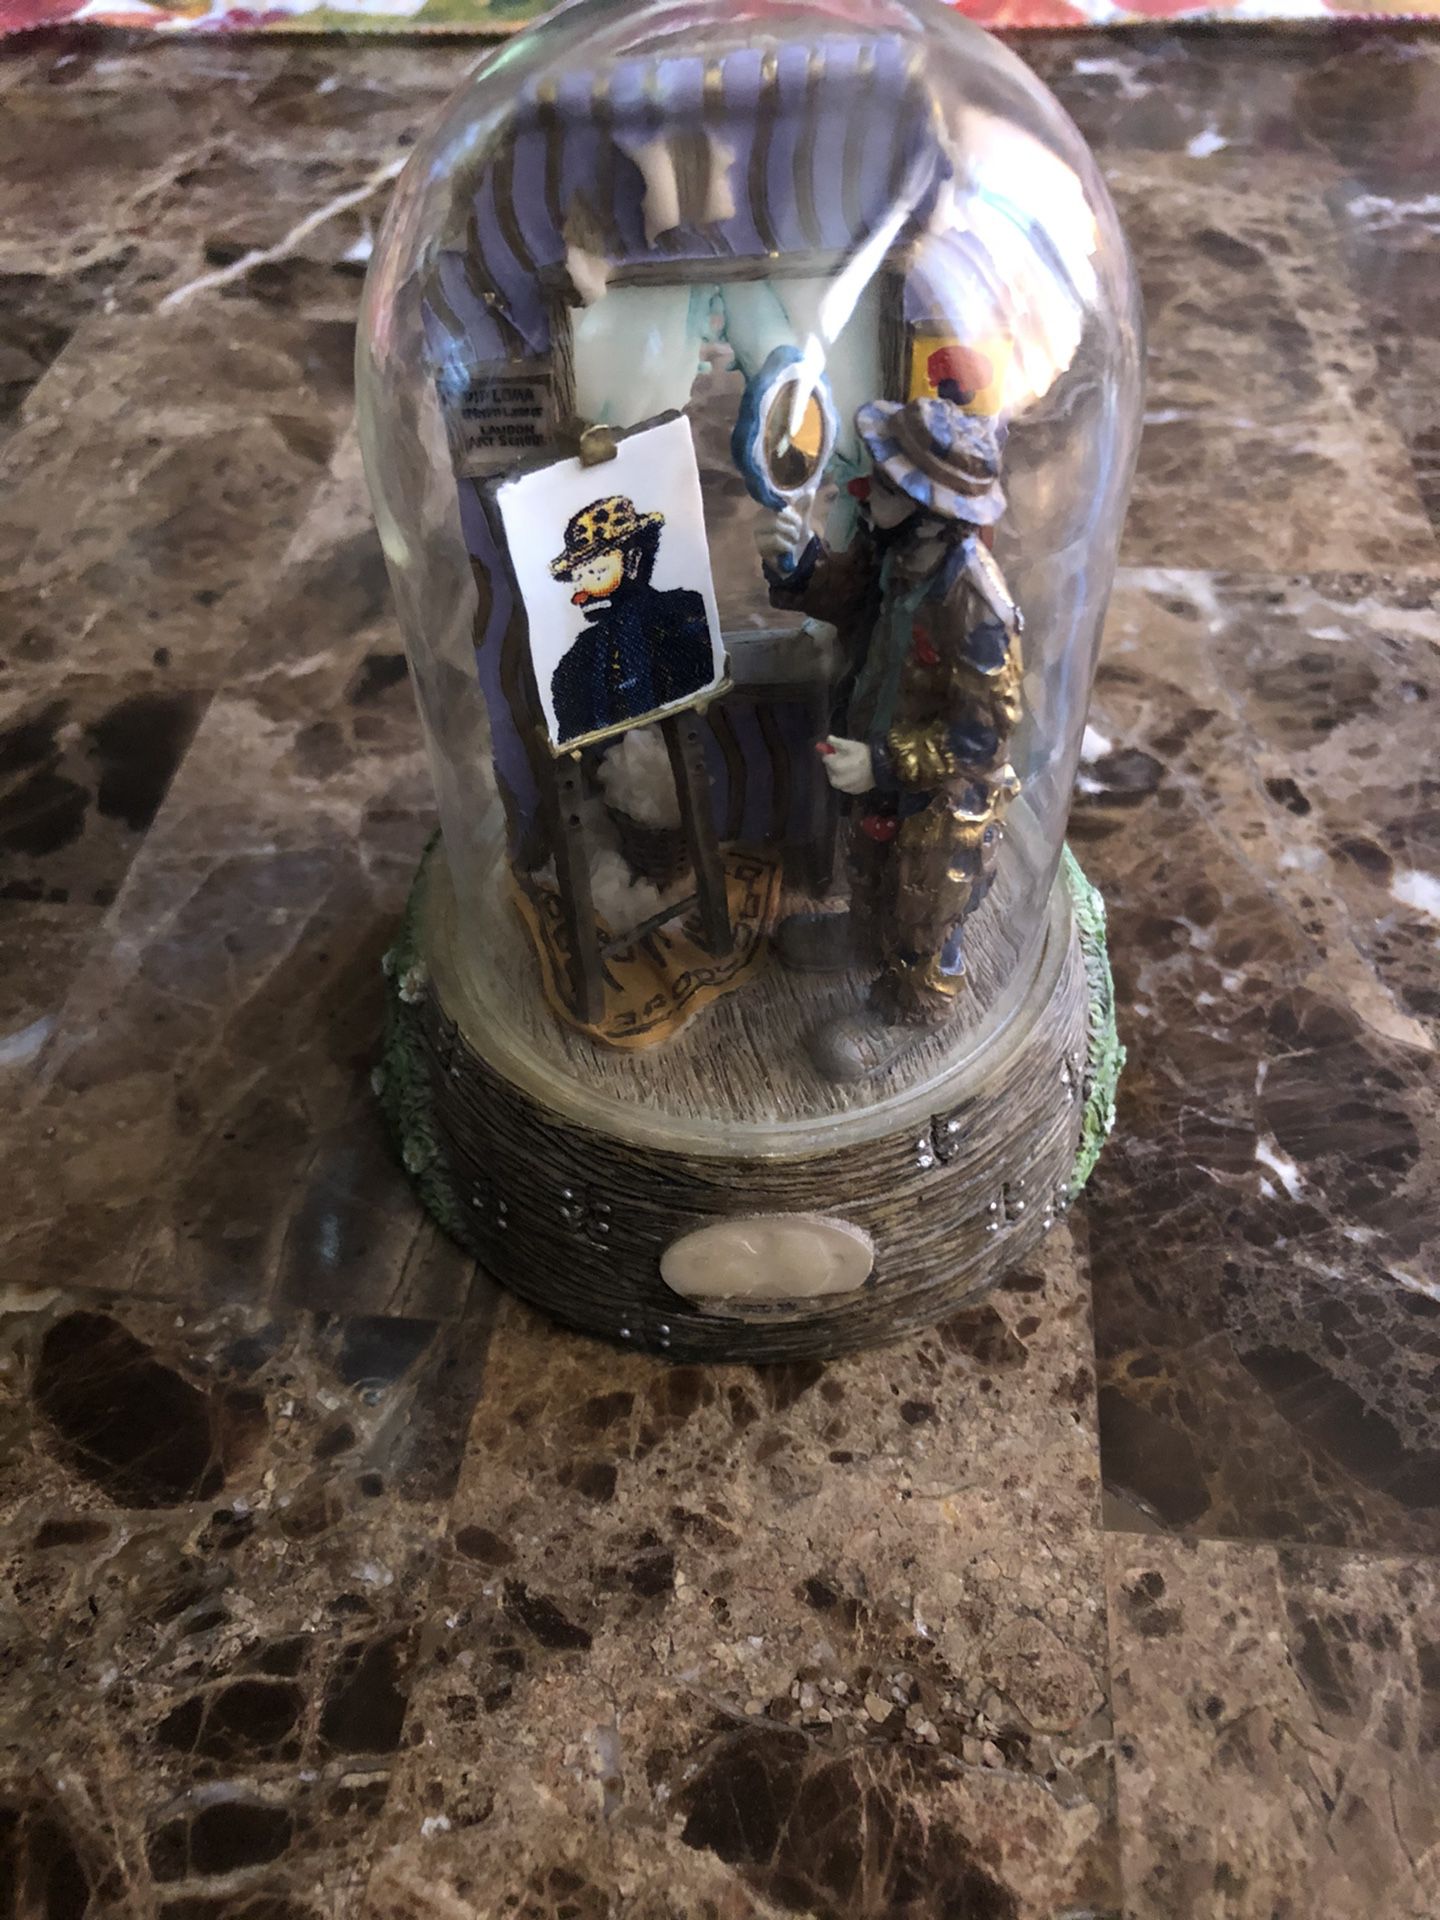 1998 First Edition “IN THE BEGINNING” Limited Edition Figurine featuring Emmett Kelly